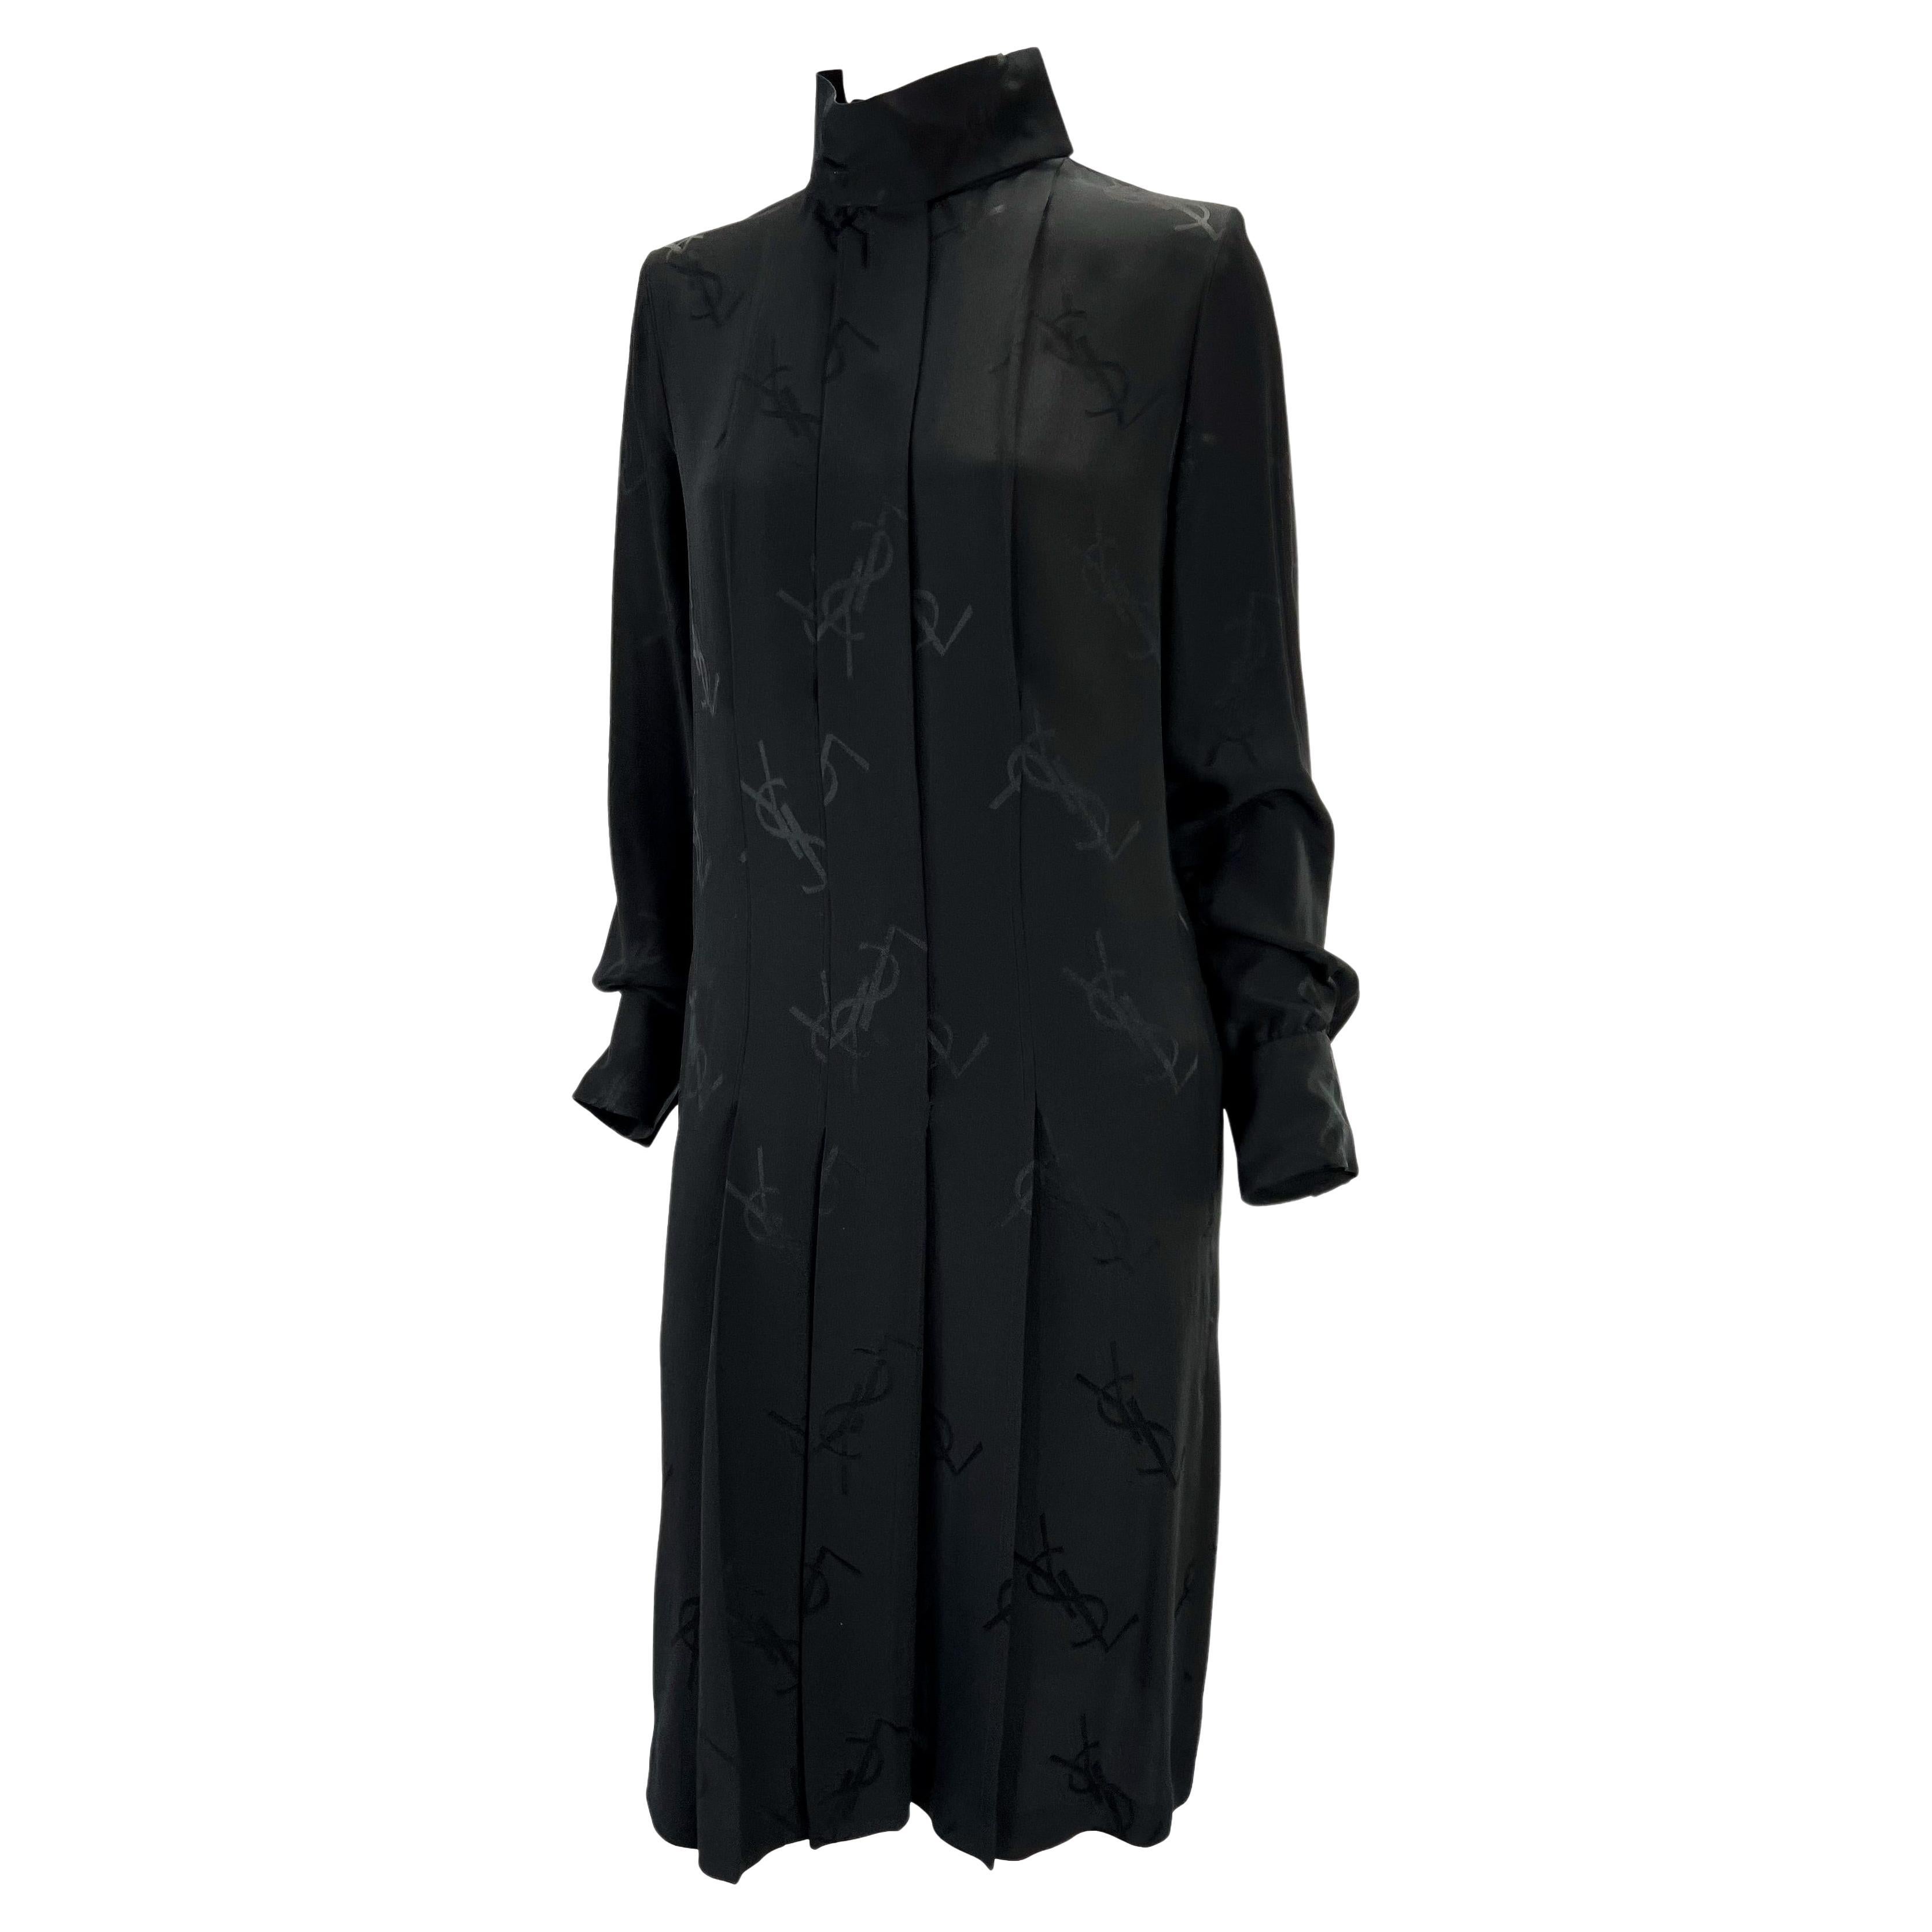 Presenting a gorgeous black silk pleated Yves Saint Laurent Rive Gauche monogram dress. From the Fall/Winter 2000 collection by Albert Elbaz, this long sleeve dress features a hidden button-up front, mock neck, flowing sleeves, and pleating at the